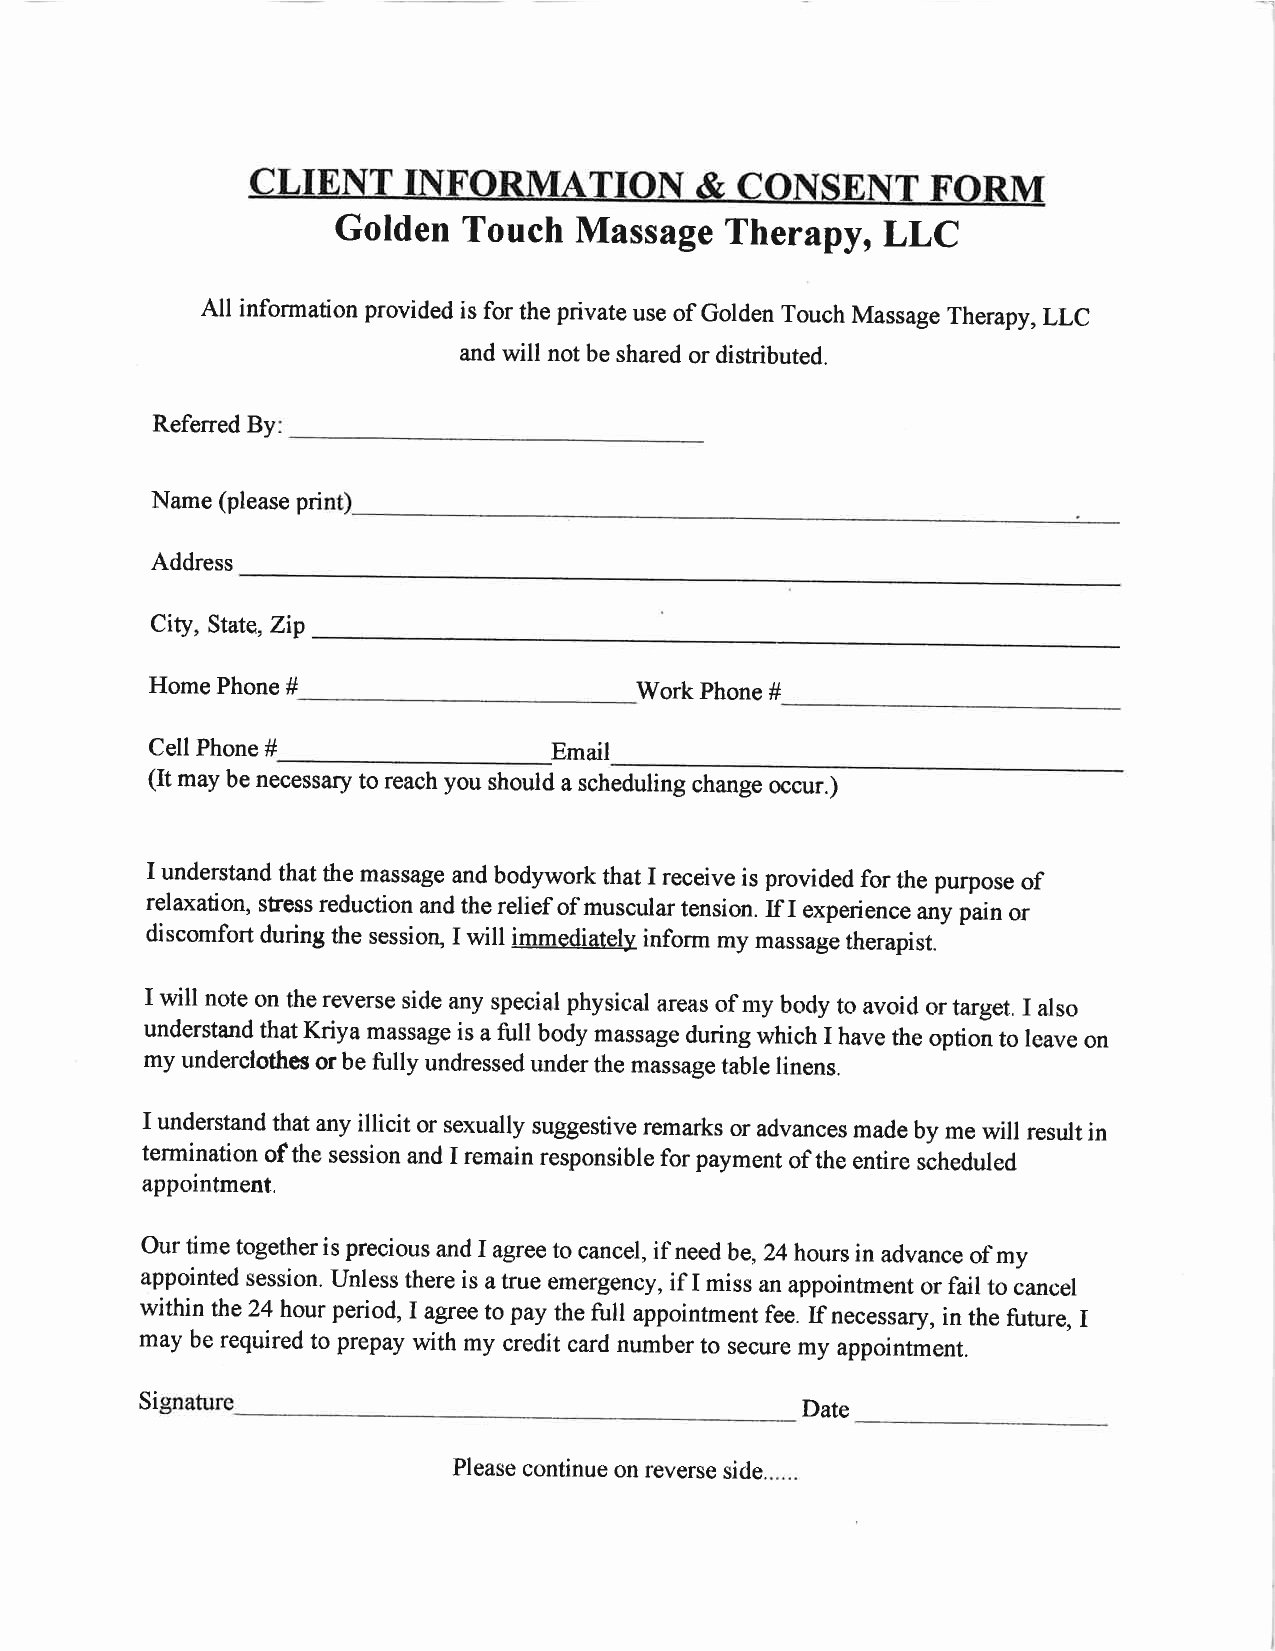 Massage therapy Intake form Template Unique Golden touch Massage therapy Client Intake form